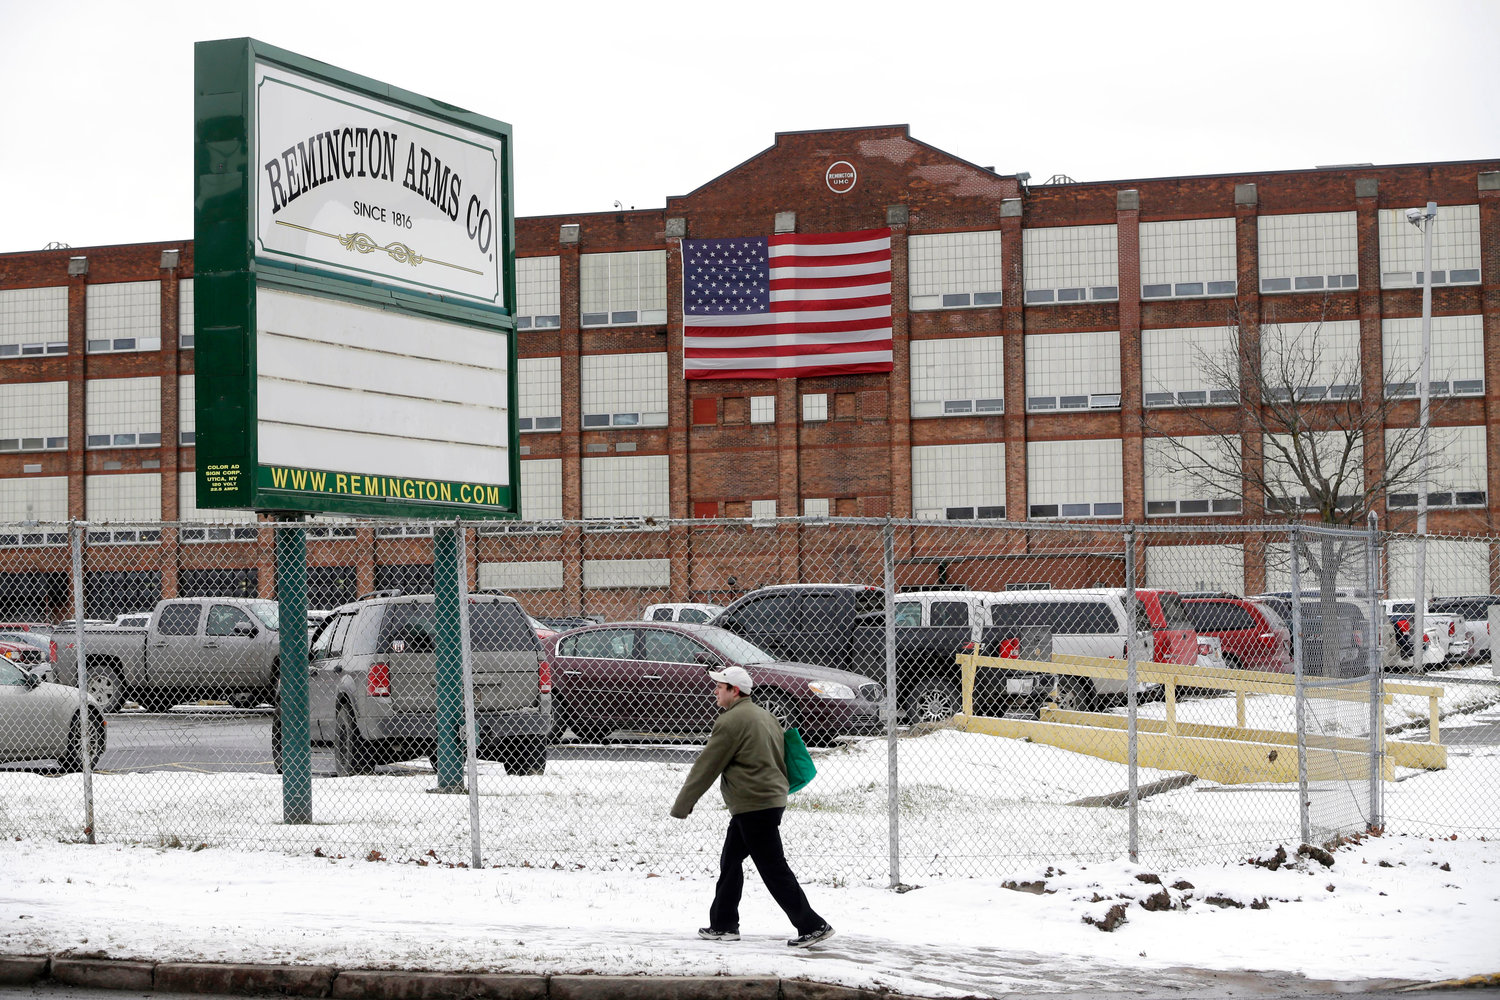 Remington Arms owners say Ilion jobs are safe